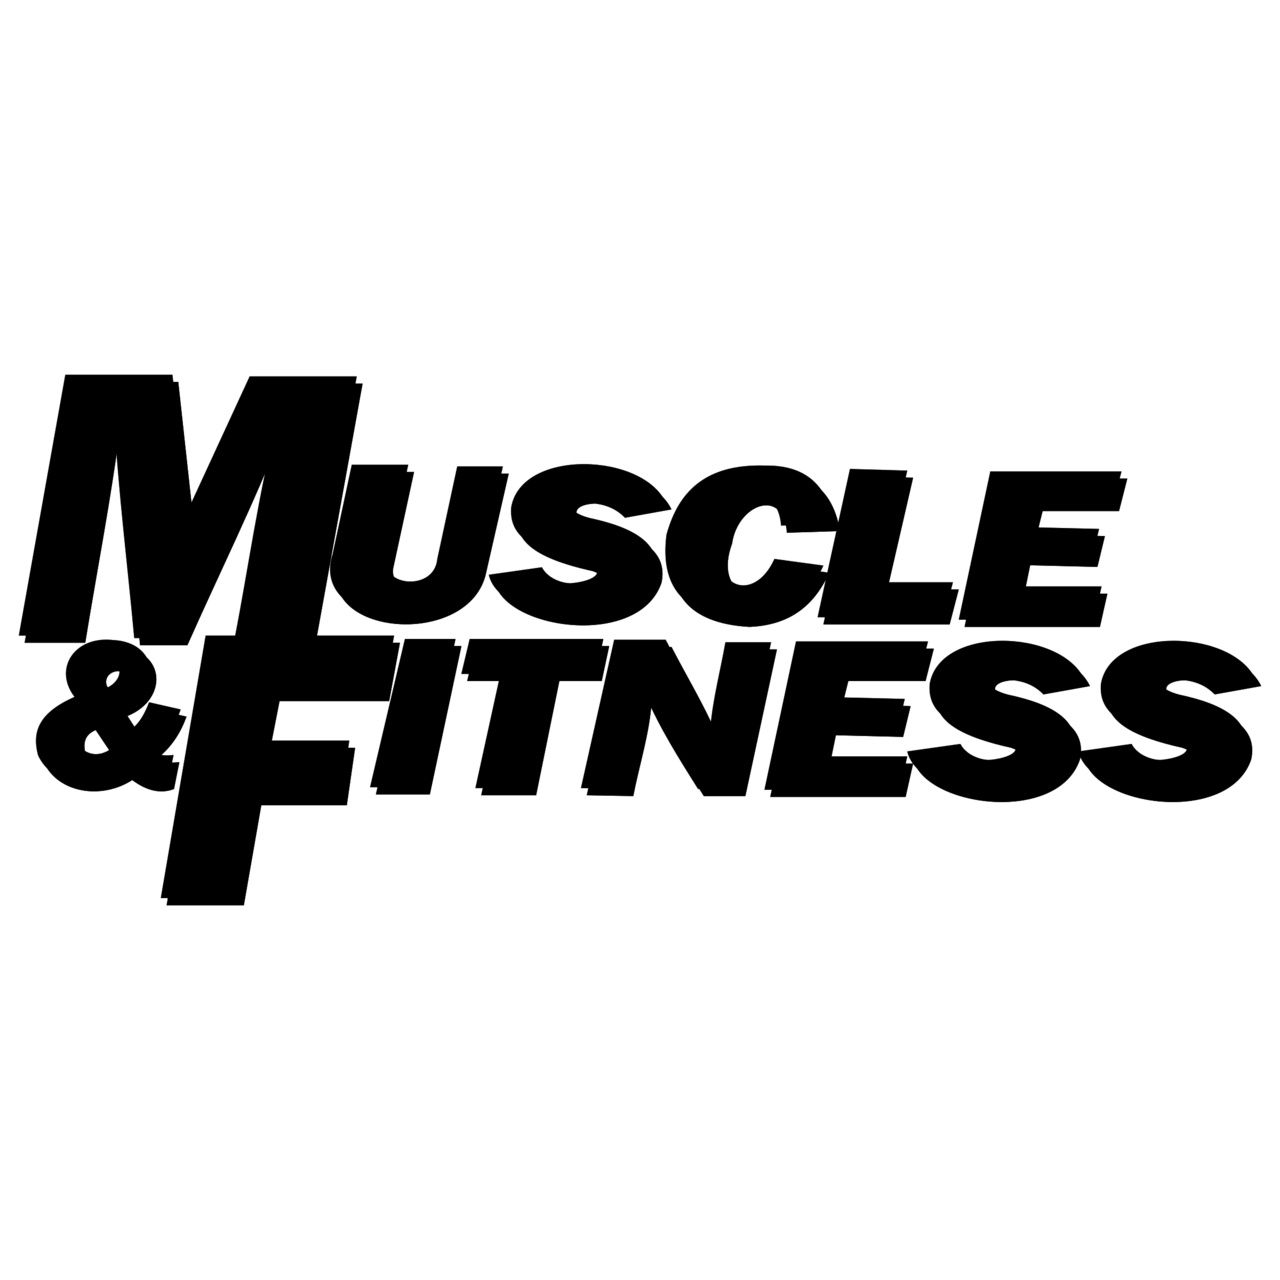 Muscle & Fitness Logo